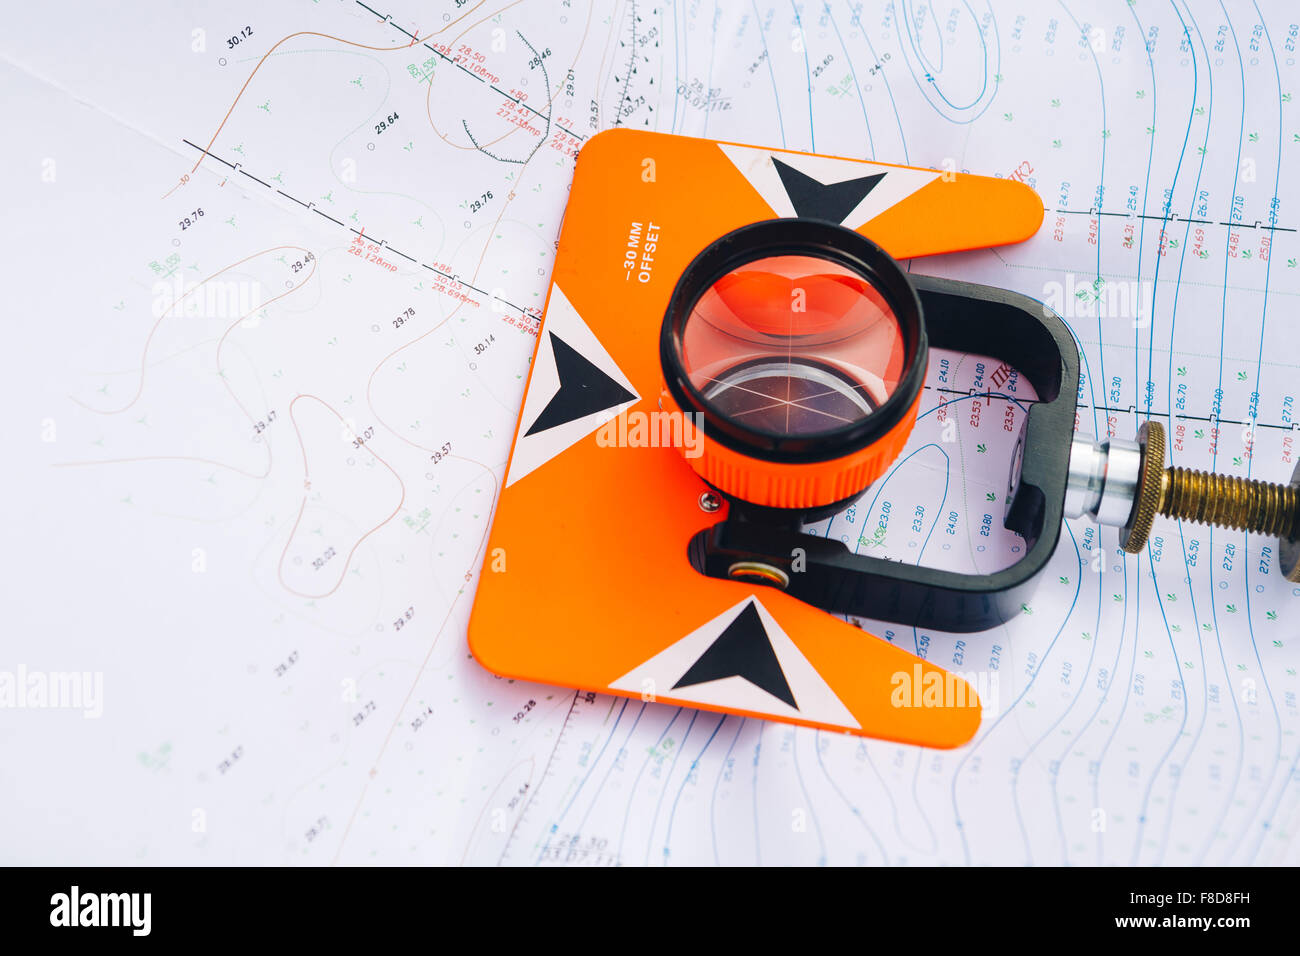 orange theodolite prism  lies on a background of geodetic maps of the area Stock Photo